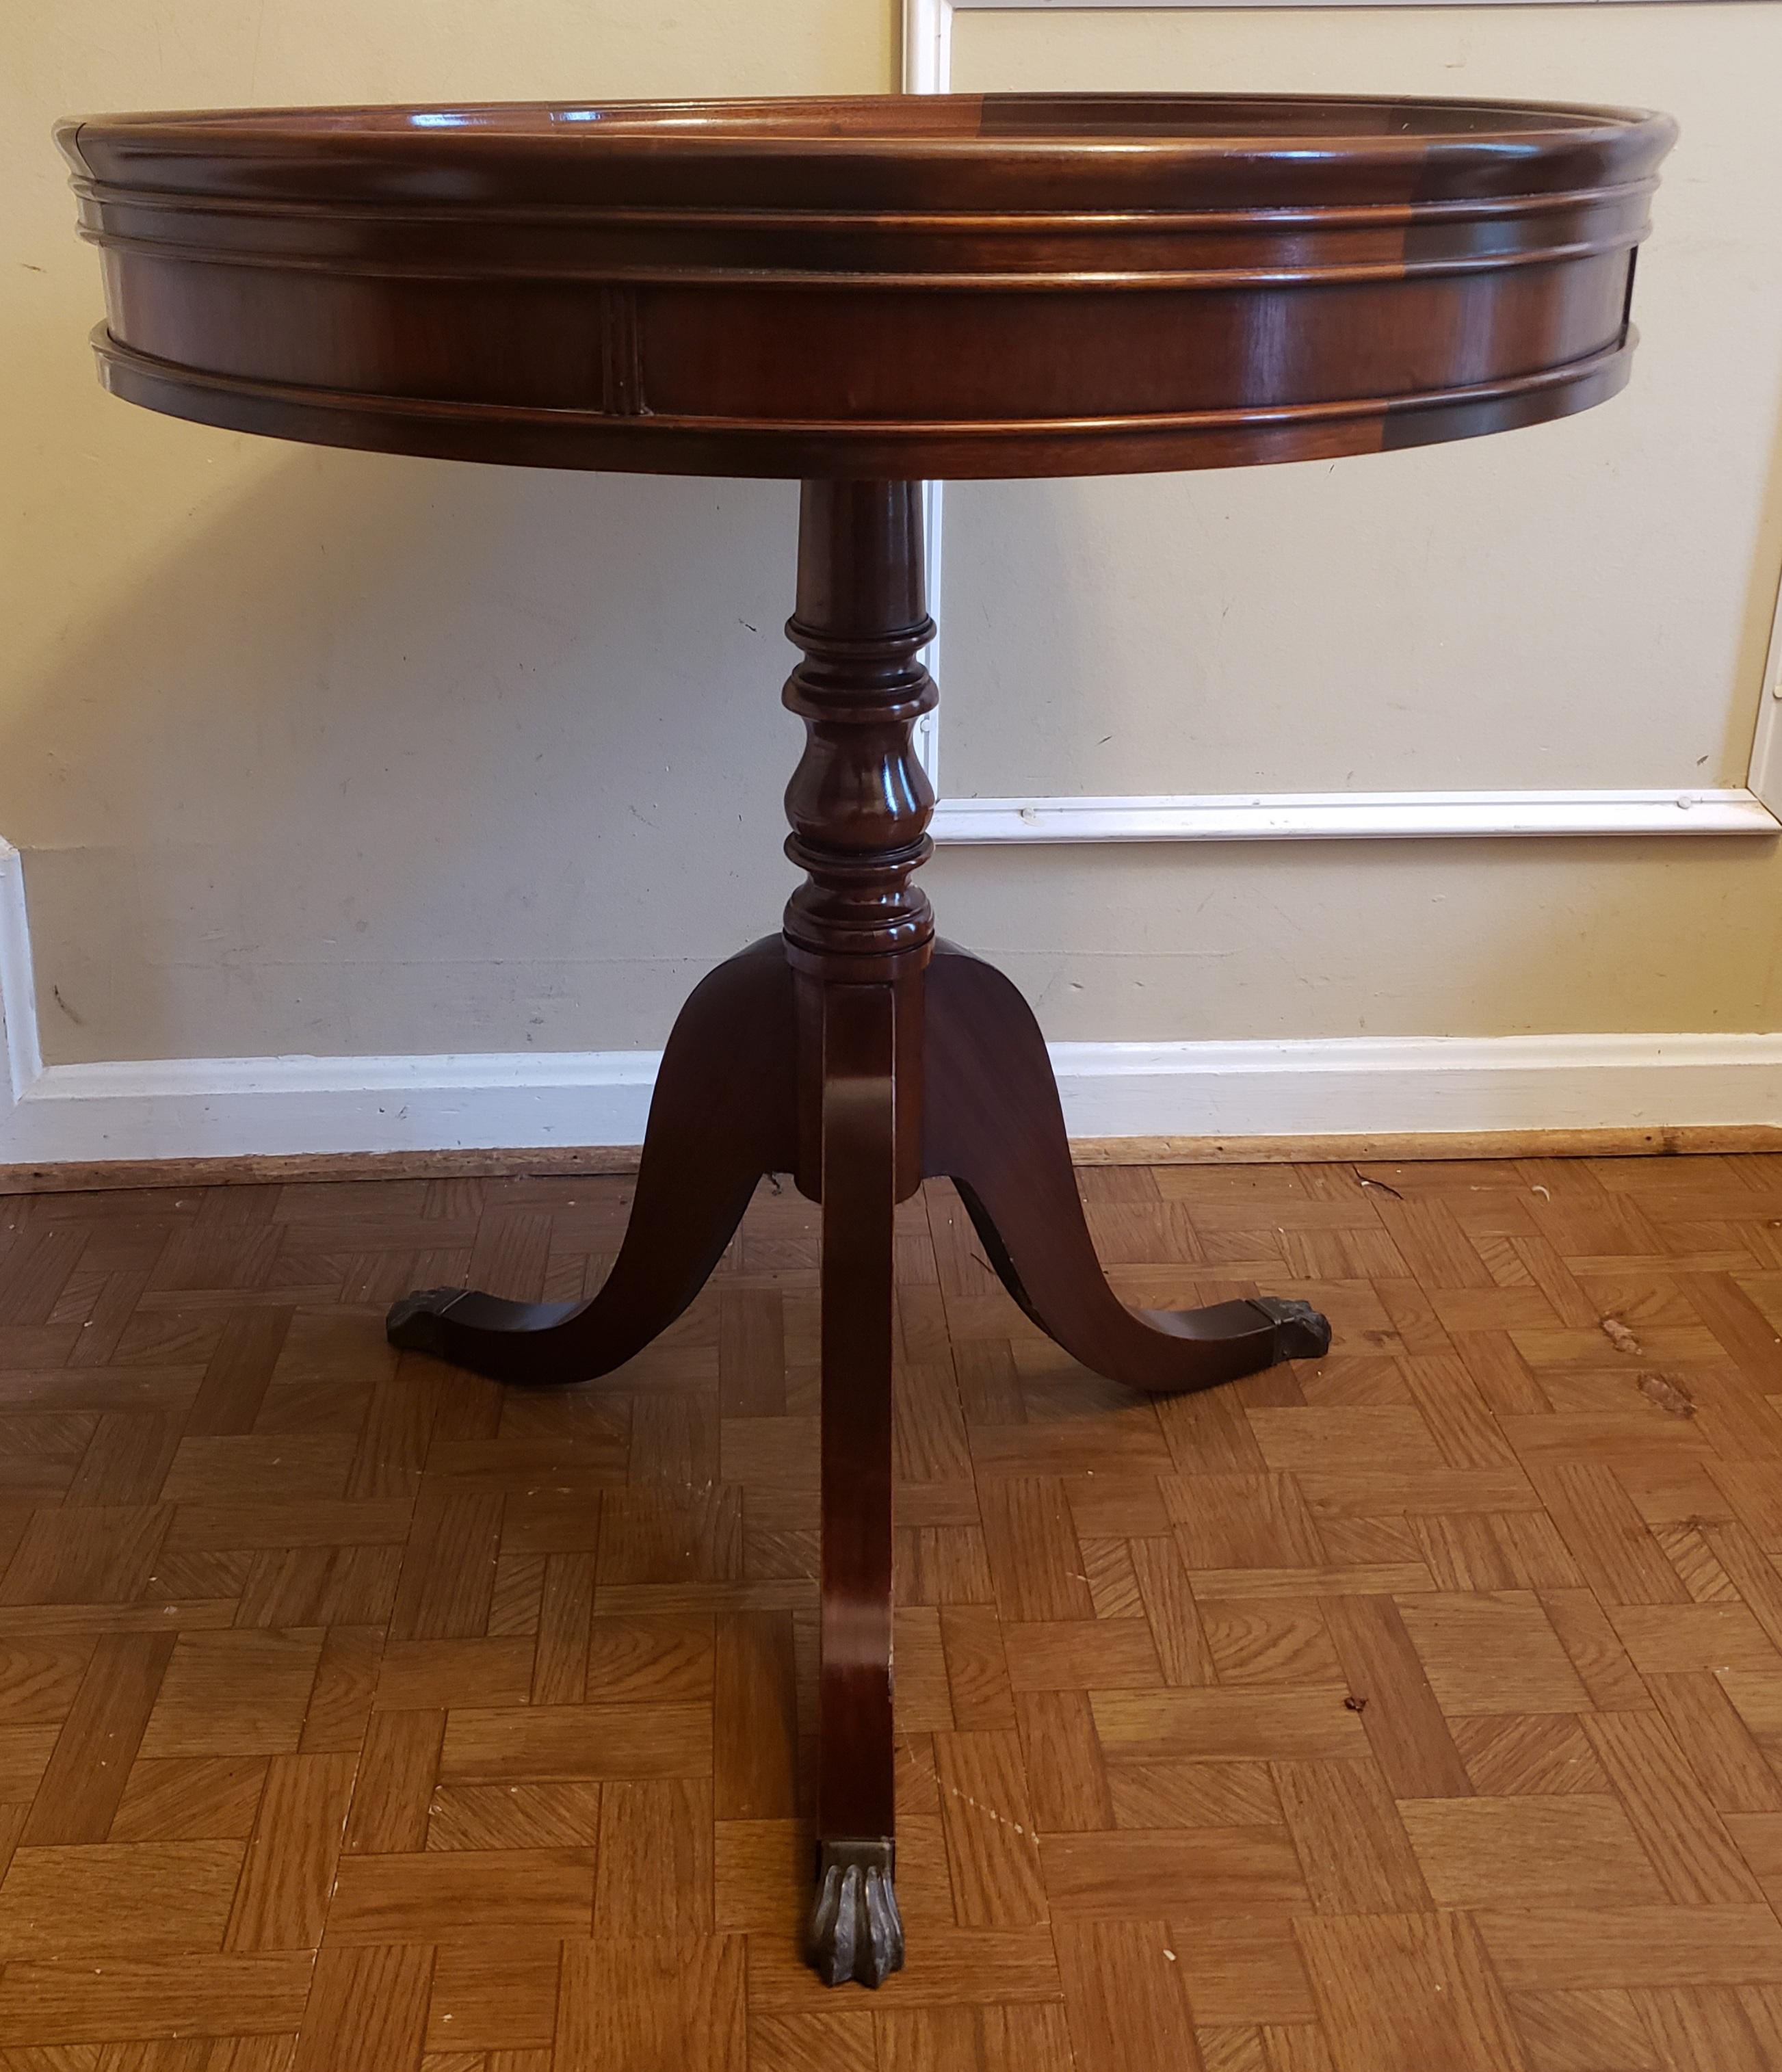 1960s Regency Mahogany and Tooled Leather Stencil Pedestal Tea Drum Table In Good Condition For Sale In Germantown, MD